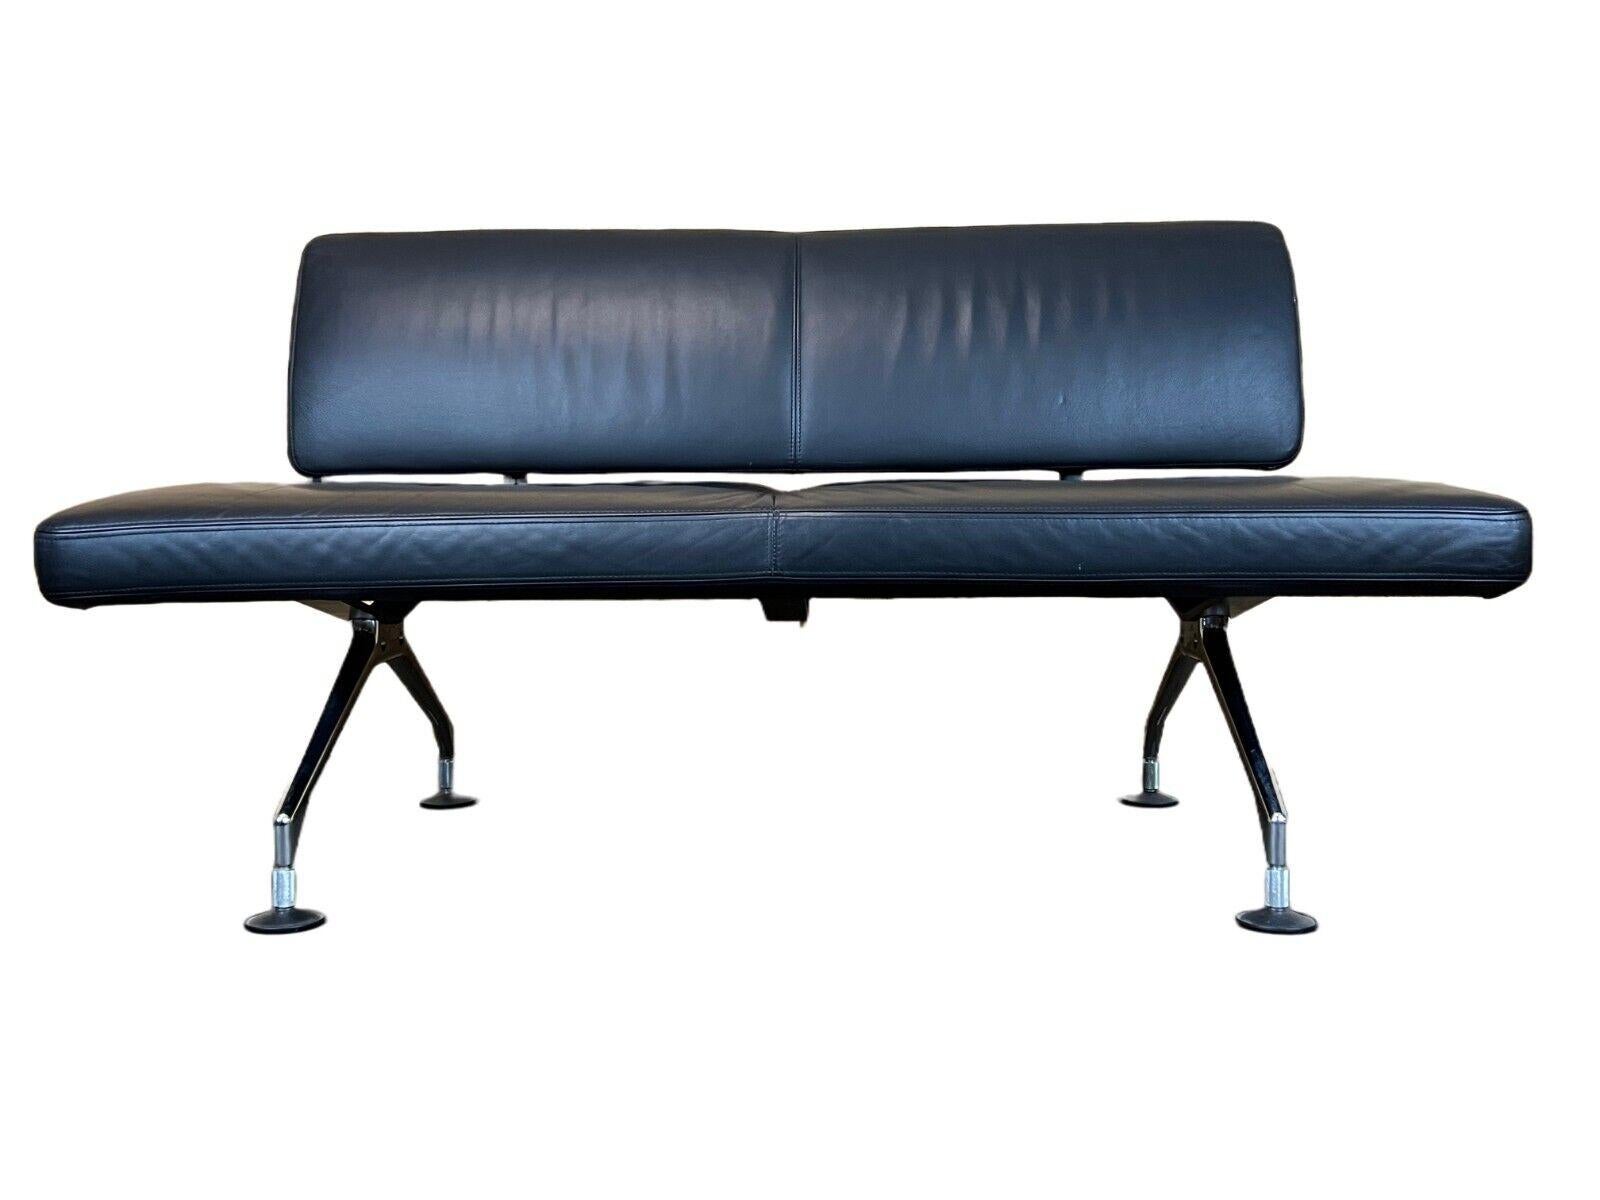 1990s area lounge sofa leather sofa by Antonio Citterio for Vitra Chrom Design

Object: sofa

Manufacturer: Vitra

Condition: good - vintage

Age: around 1990

Dimensions:

Width = 150cm
Depth = 70cm
Height = 80cm
Seat height =